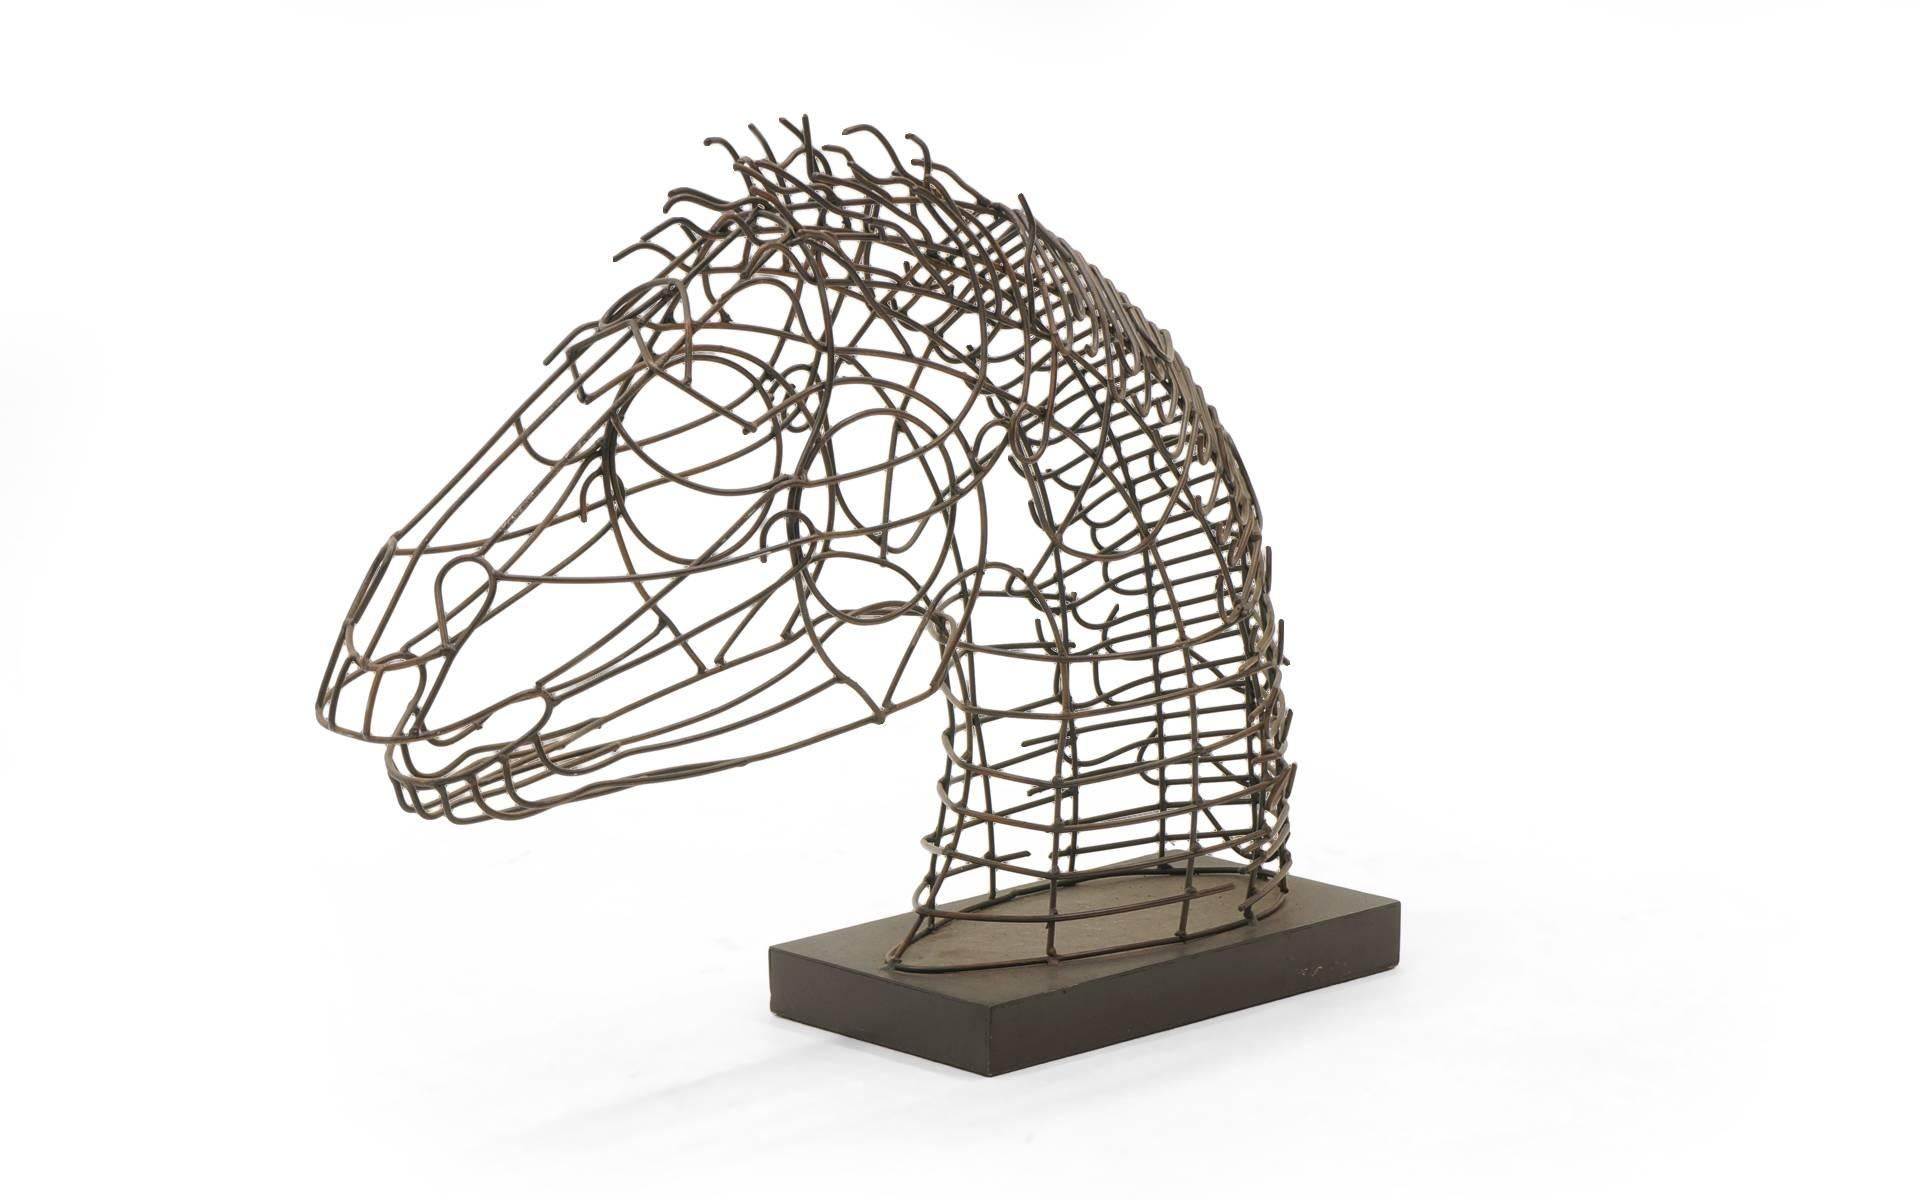 Large table top wire horse sculpture.  1960s.  Artist is unknown to us, but this is very well done and quite striking piece.